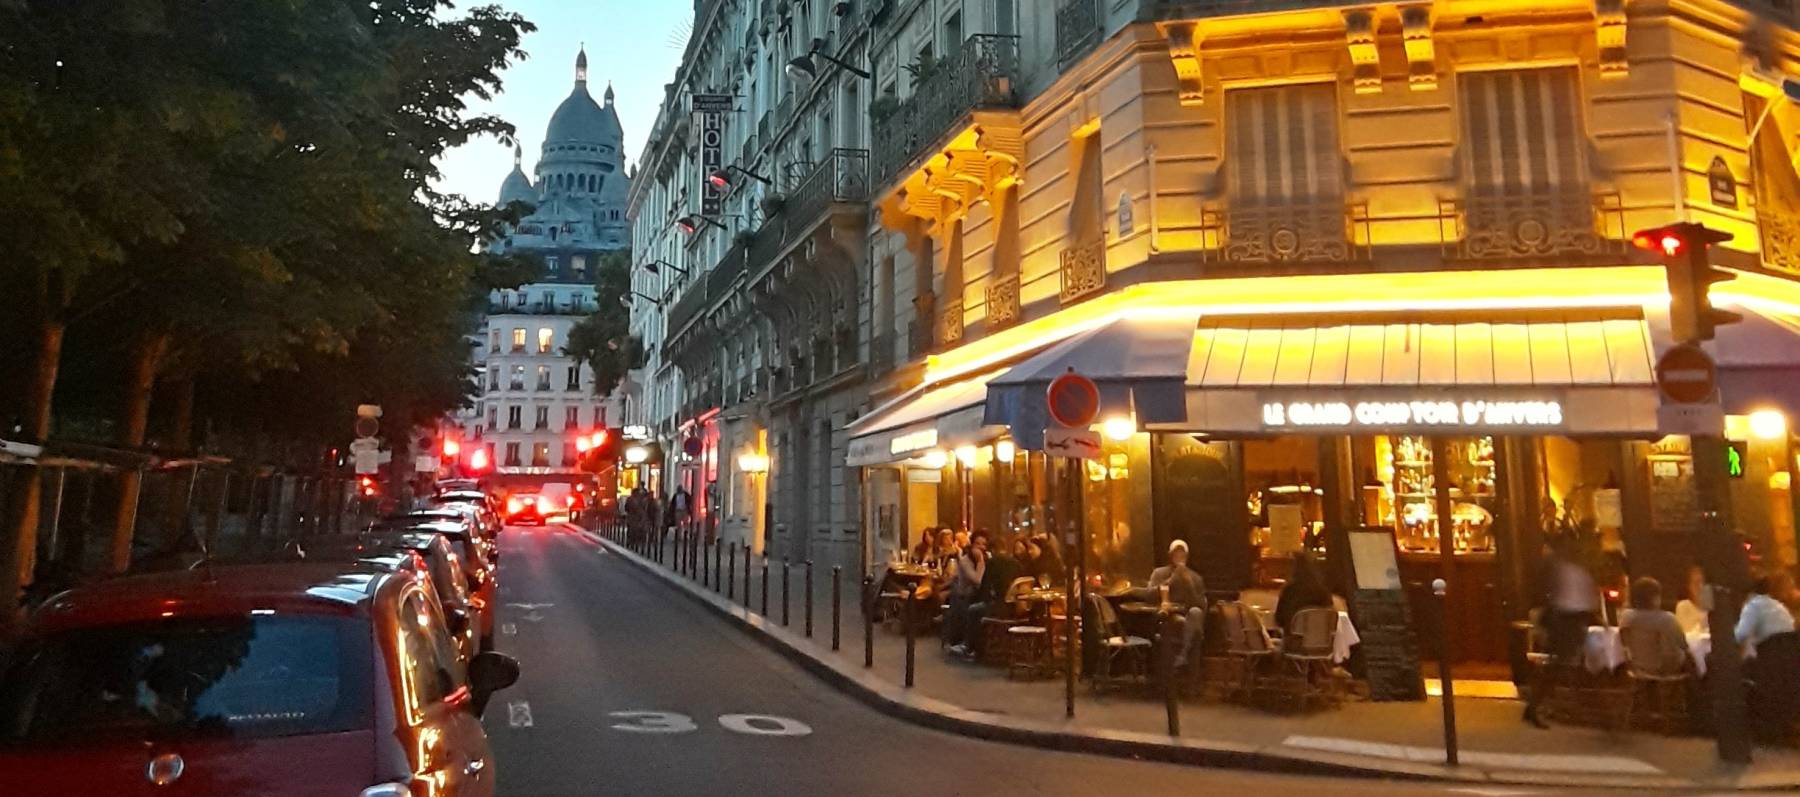 A distinctively Parisian neighborhood at the base of Montmartre.